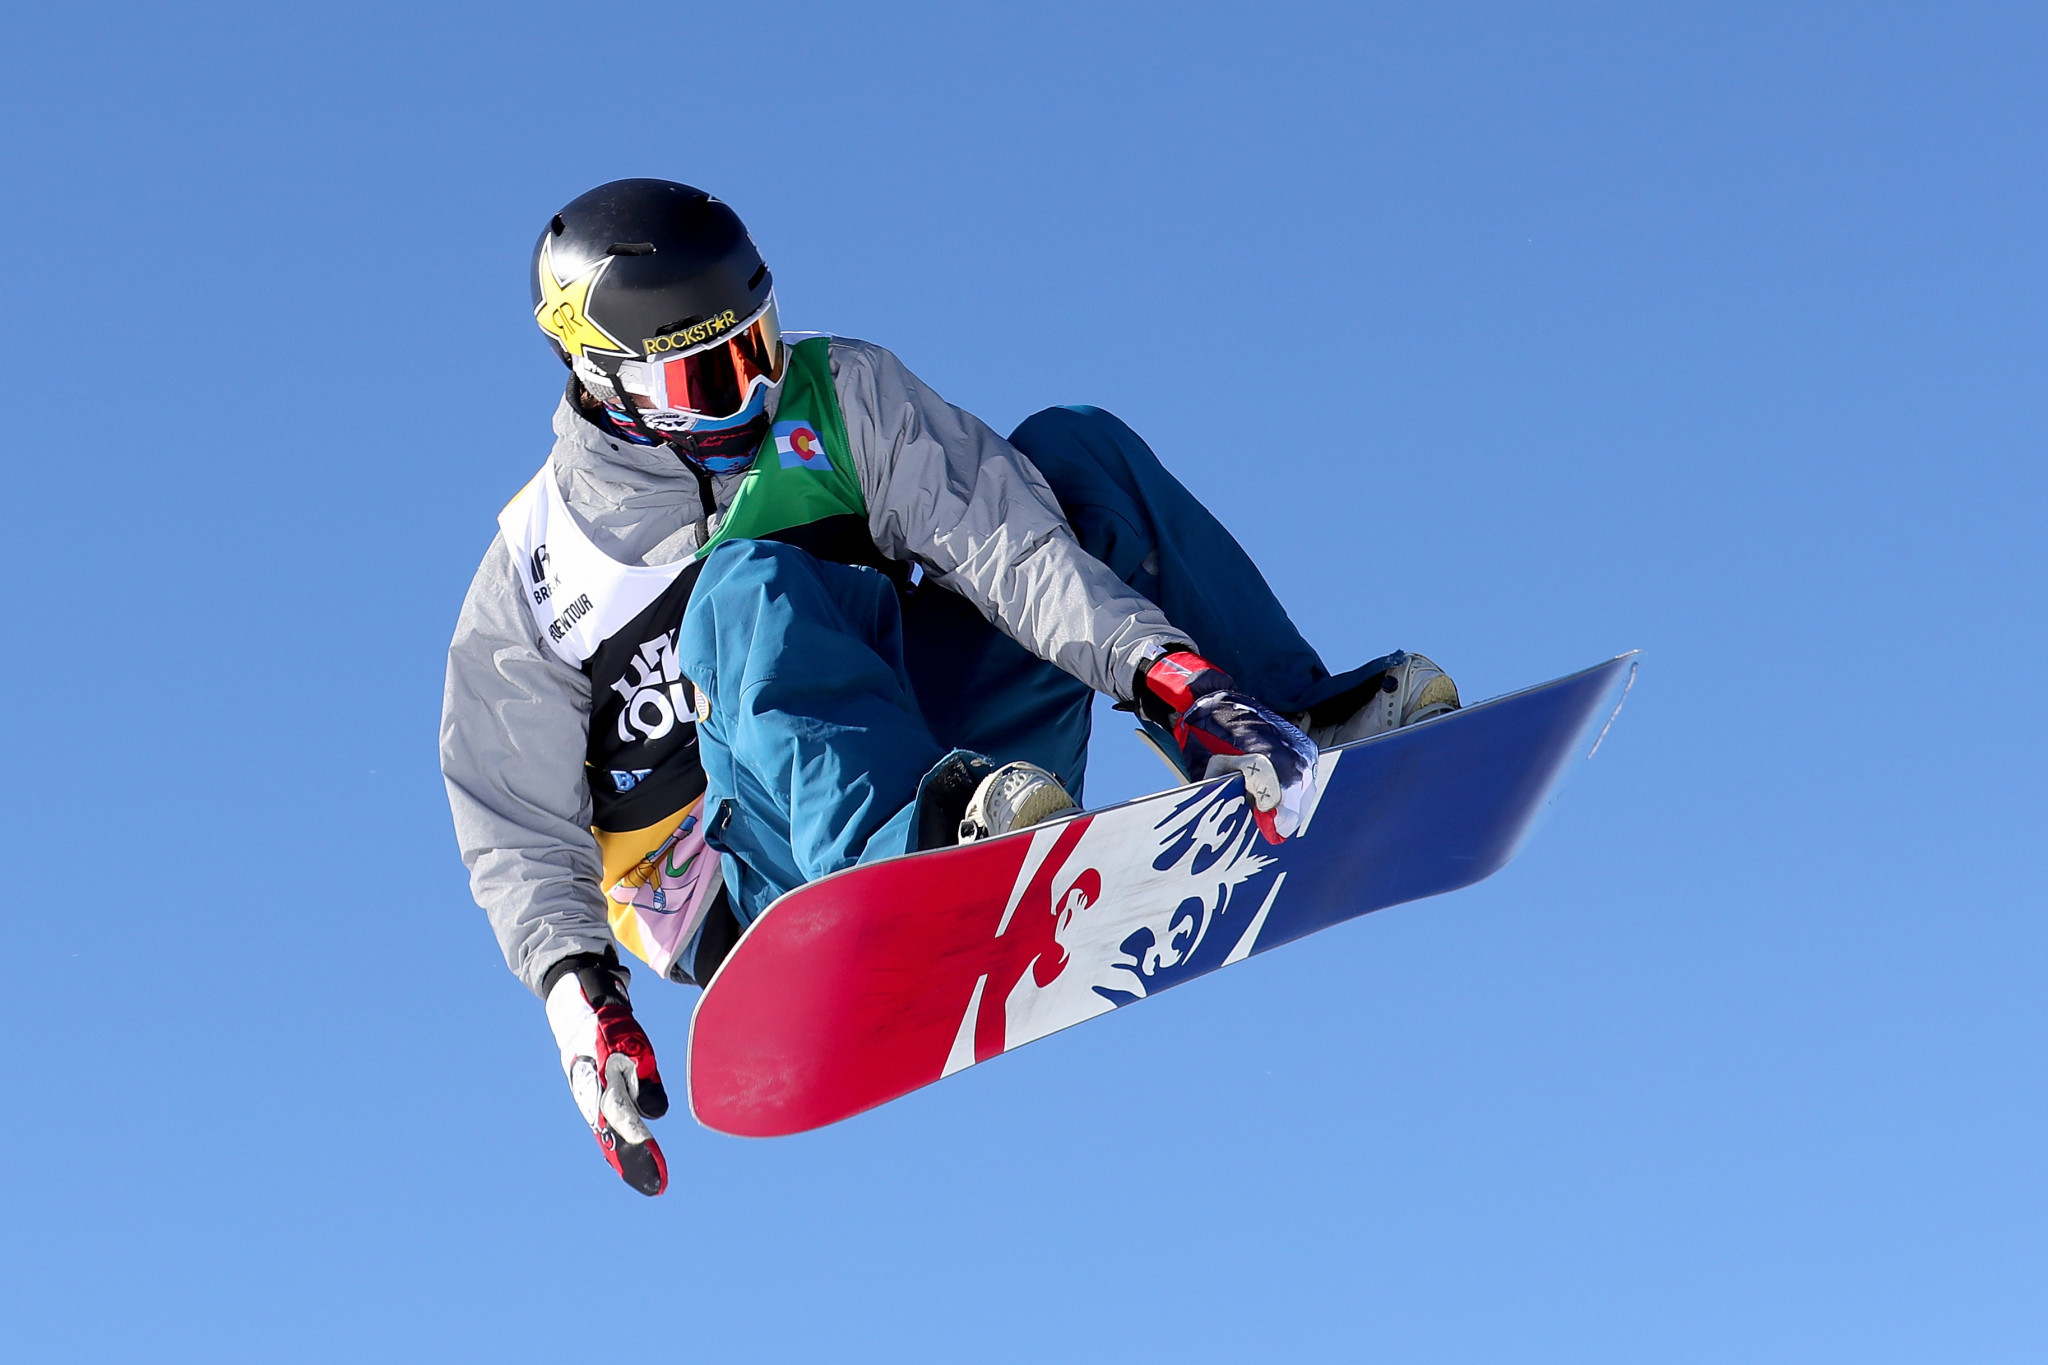 Chris Corning of the United States won his first slopestyle FIS World Cup event of the season in Laax ©Getty Images